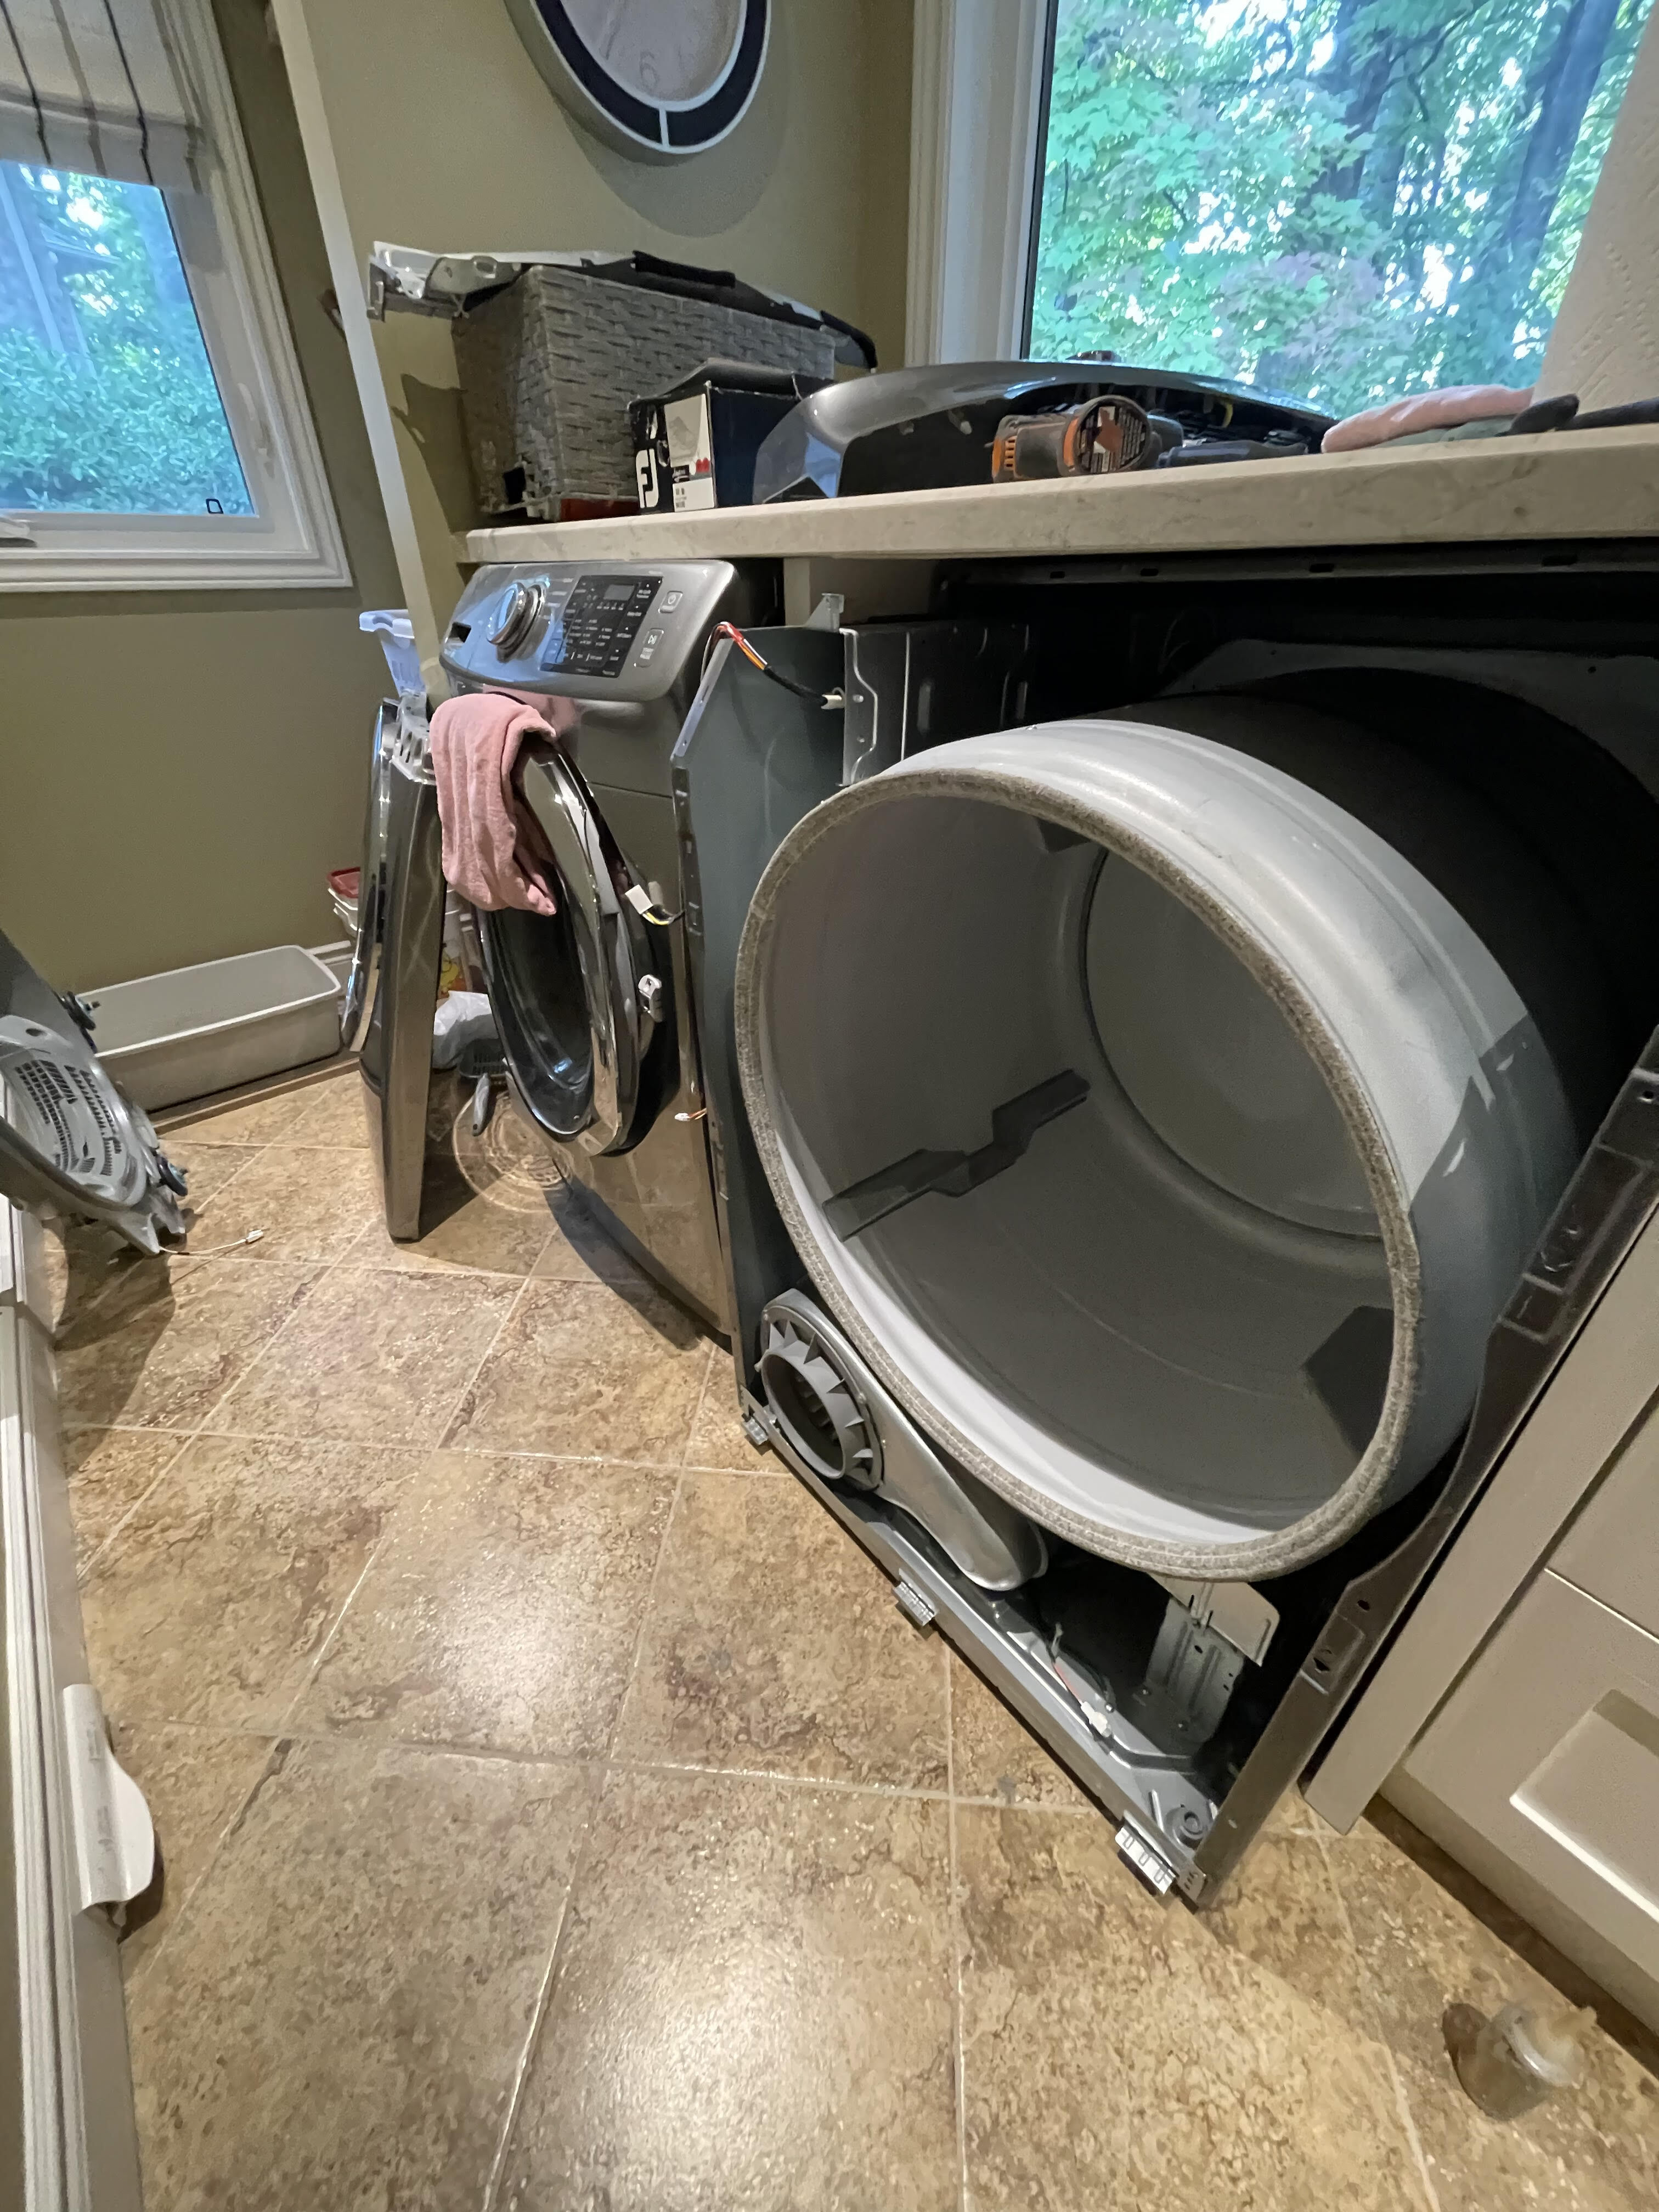 Dryer is not spinning - service in Toronto and the GTA